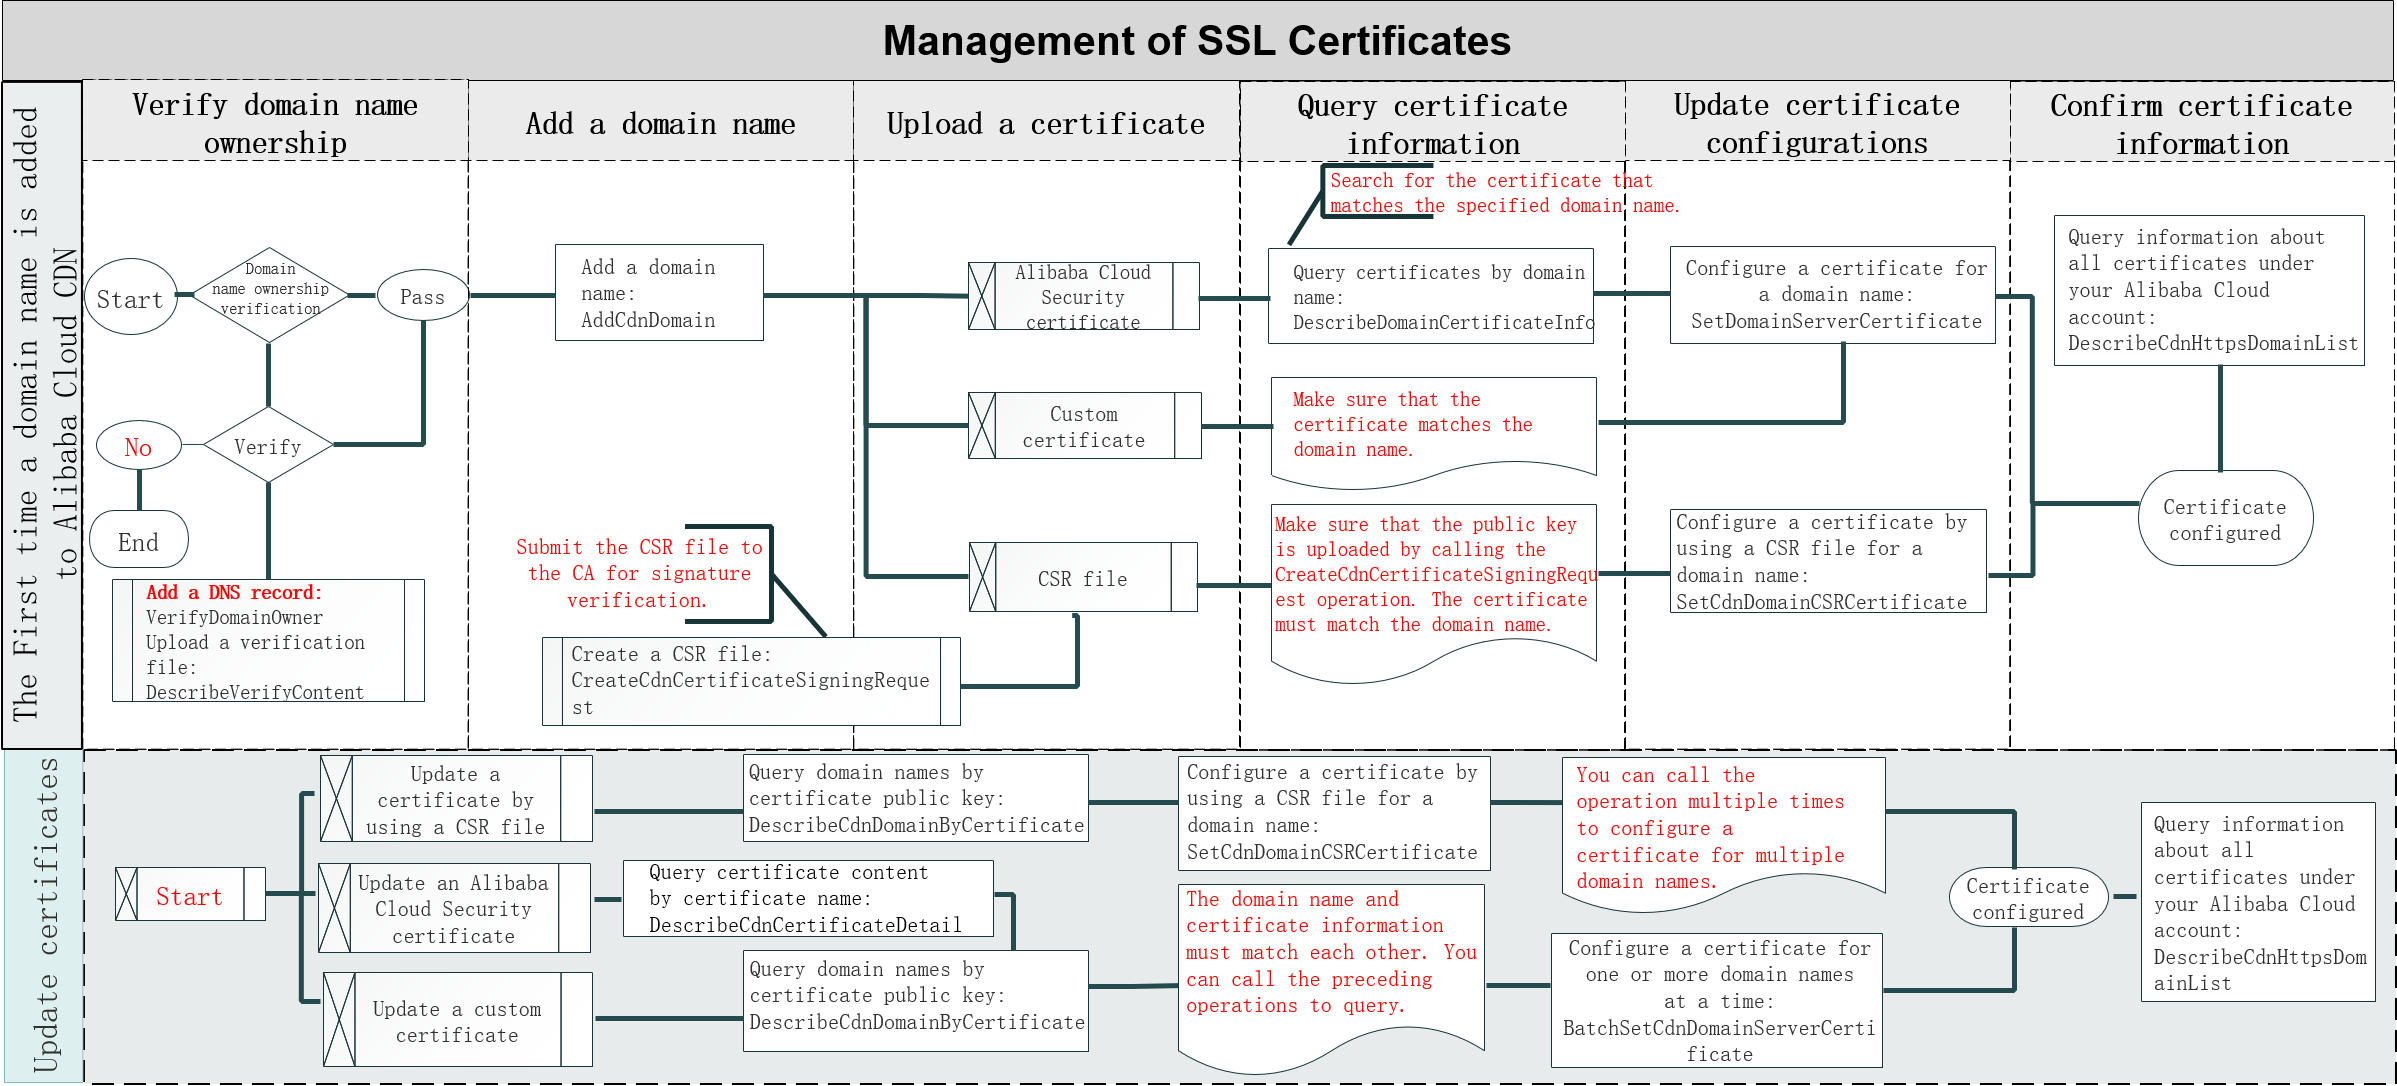 Certificate management operations